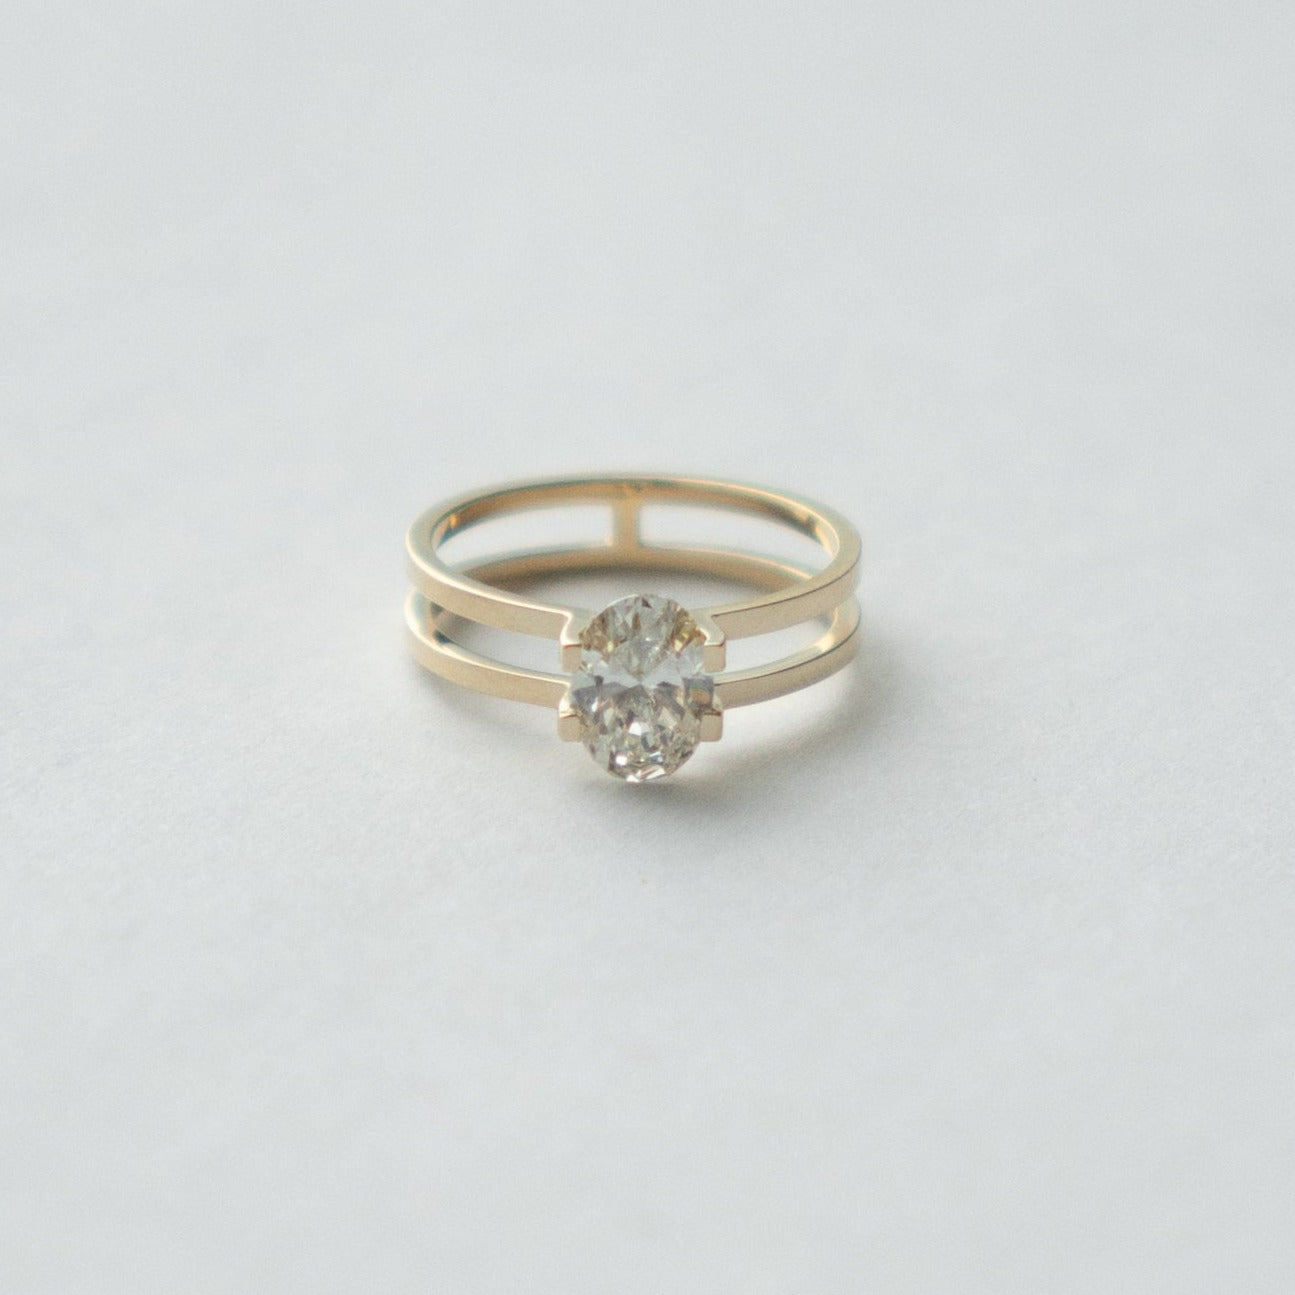 Mes Double-band Ring in 14k Gold set with 1ct oval cut lab-grown diamond By SHW Fine Jewelry NYC